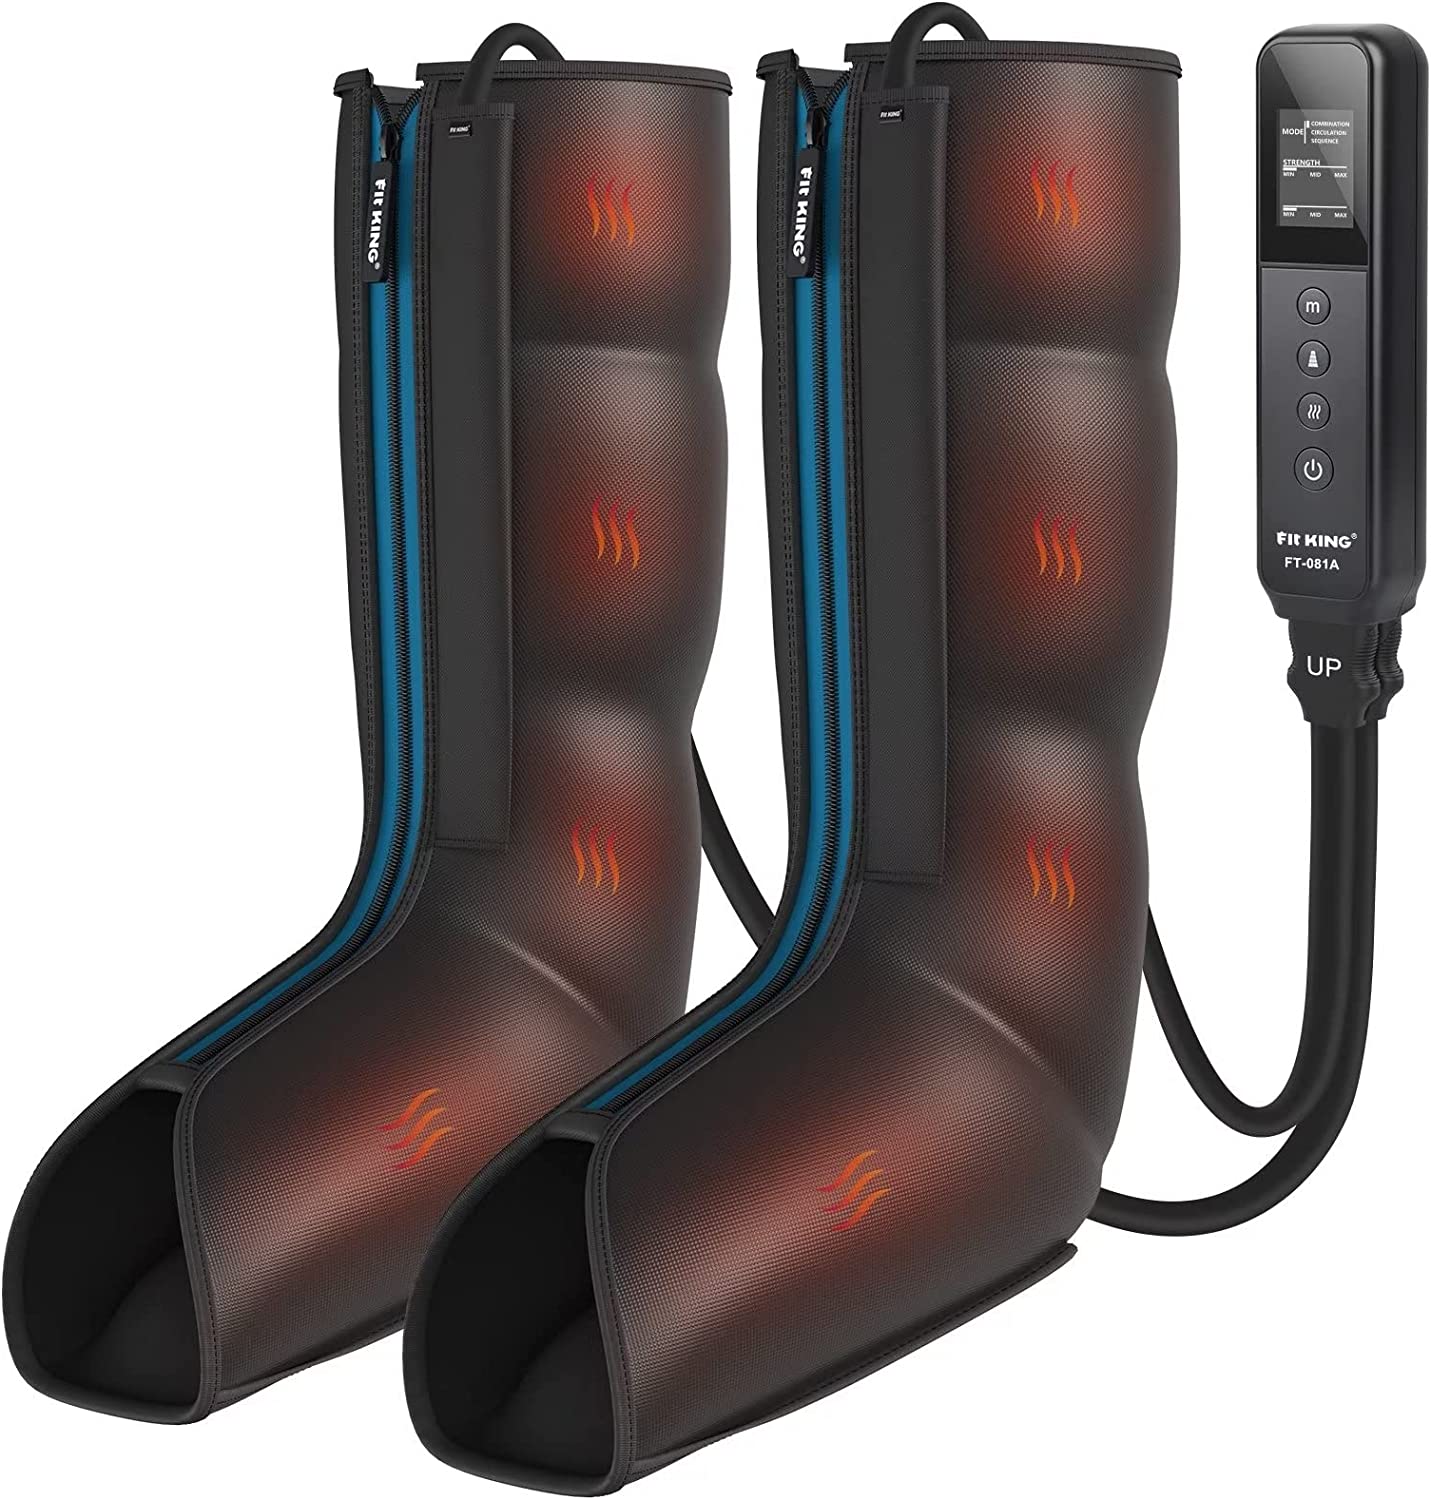 Upgraded Leg Massager with Heat FT-081A